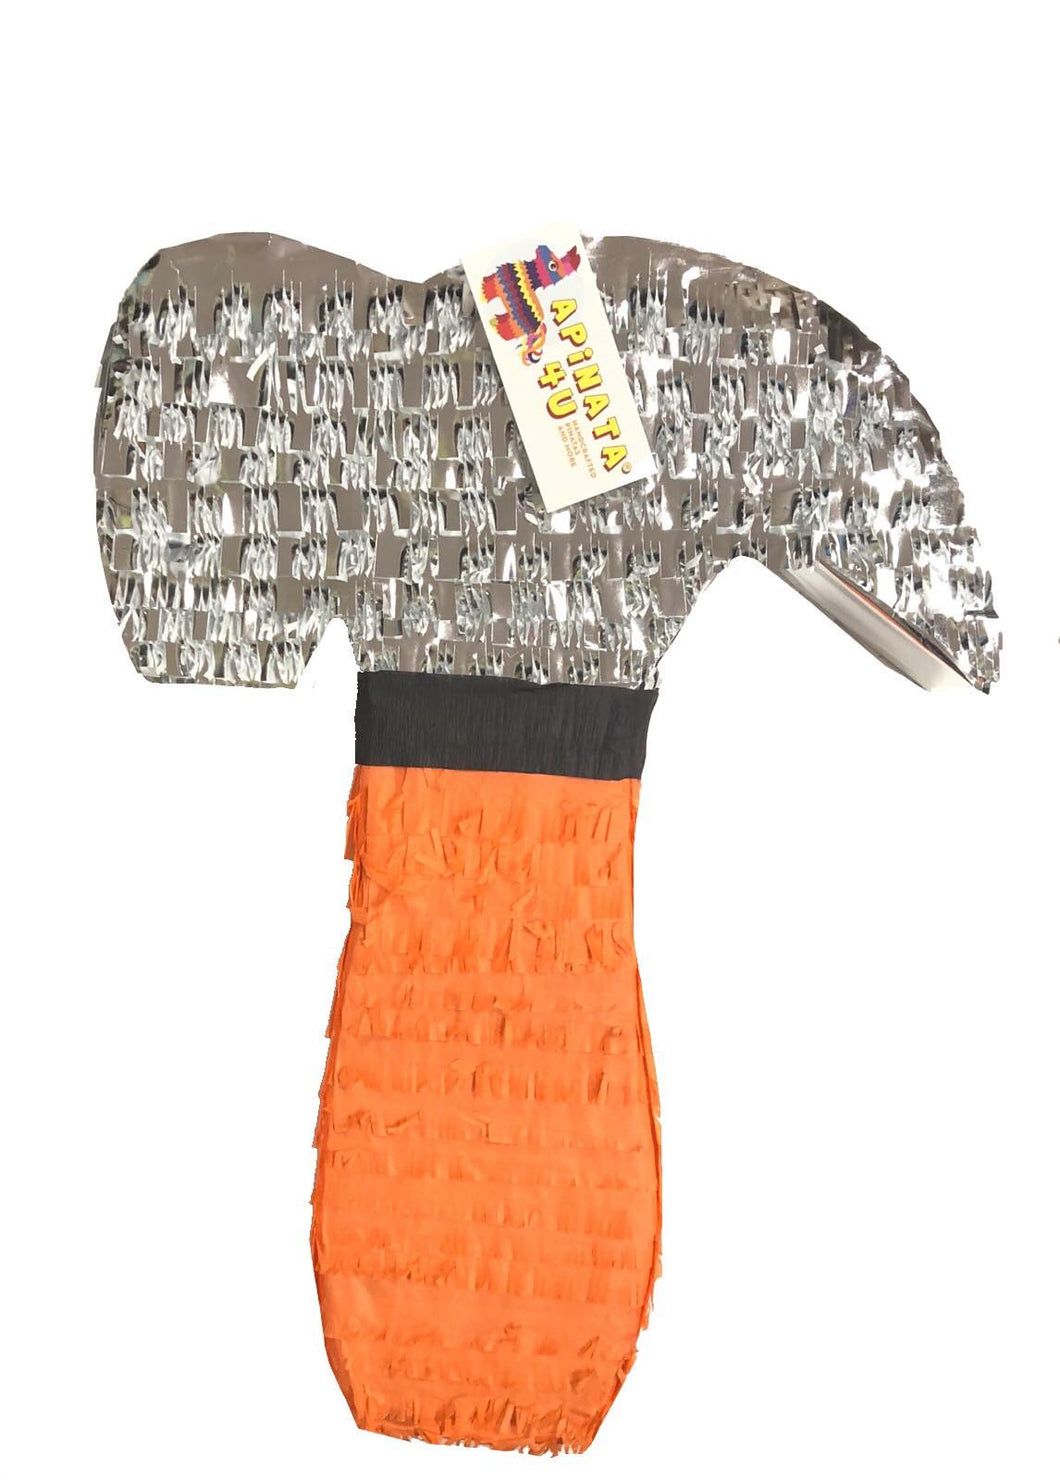 Best Dad Ever Hammer Pinata Tools Orange Color Theme Party